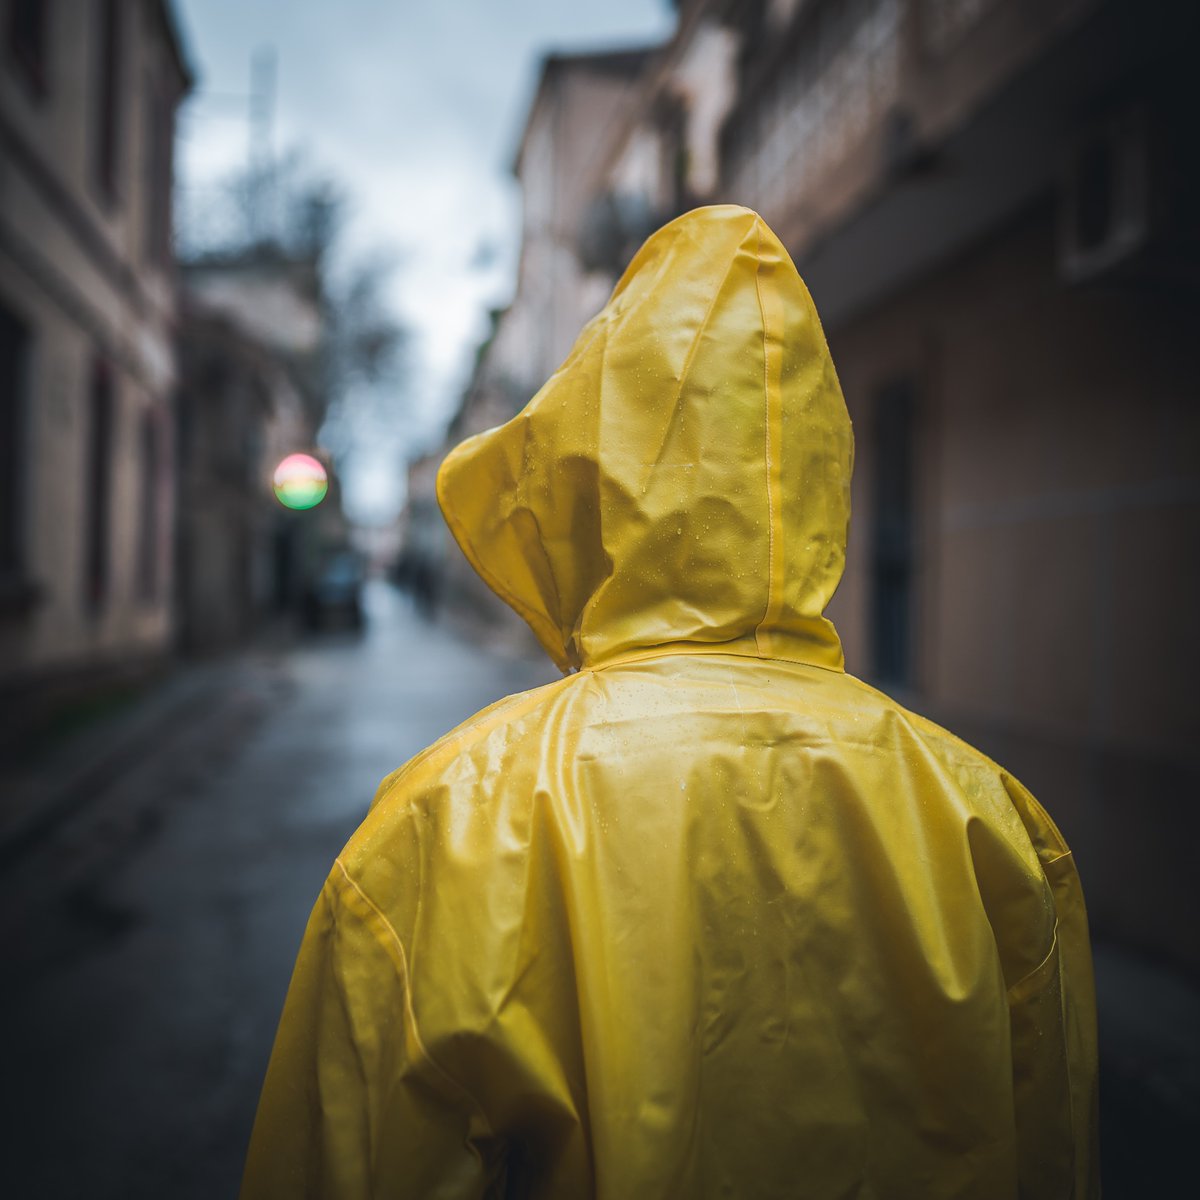 It's been a wet and windy start to autumn and we are running low on raincoats, so that we can give to our friends to keep them warm, dry and safe on the streets. If you or your company can help us please donate what you can barnabus-manchester.org.uk/donate-items #homeless #manchester